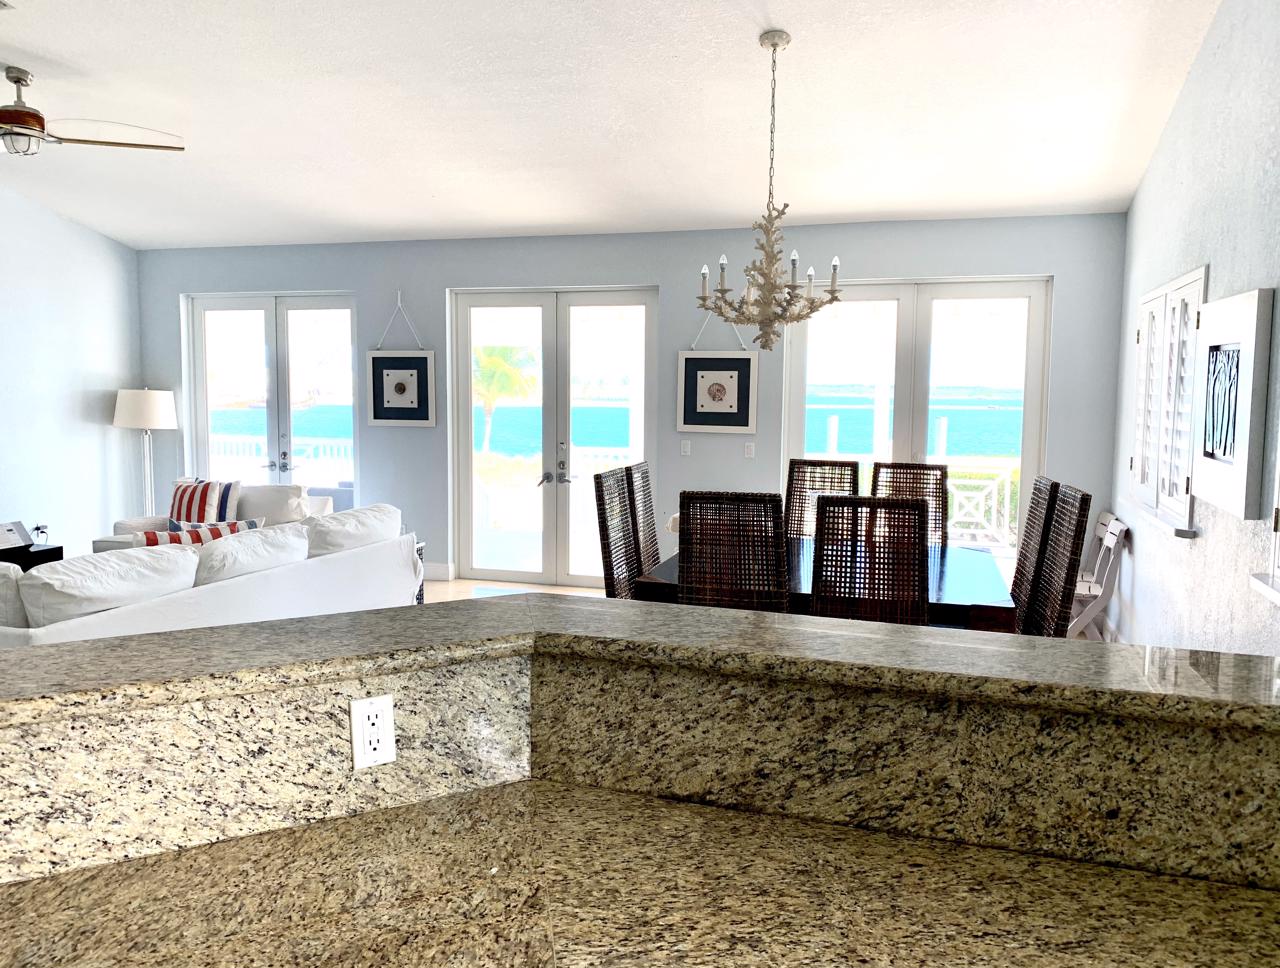 Bimini bayfront home with dockage.